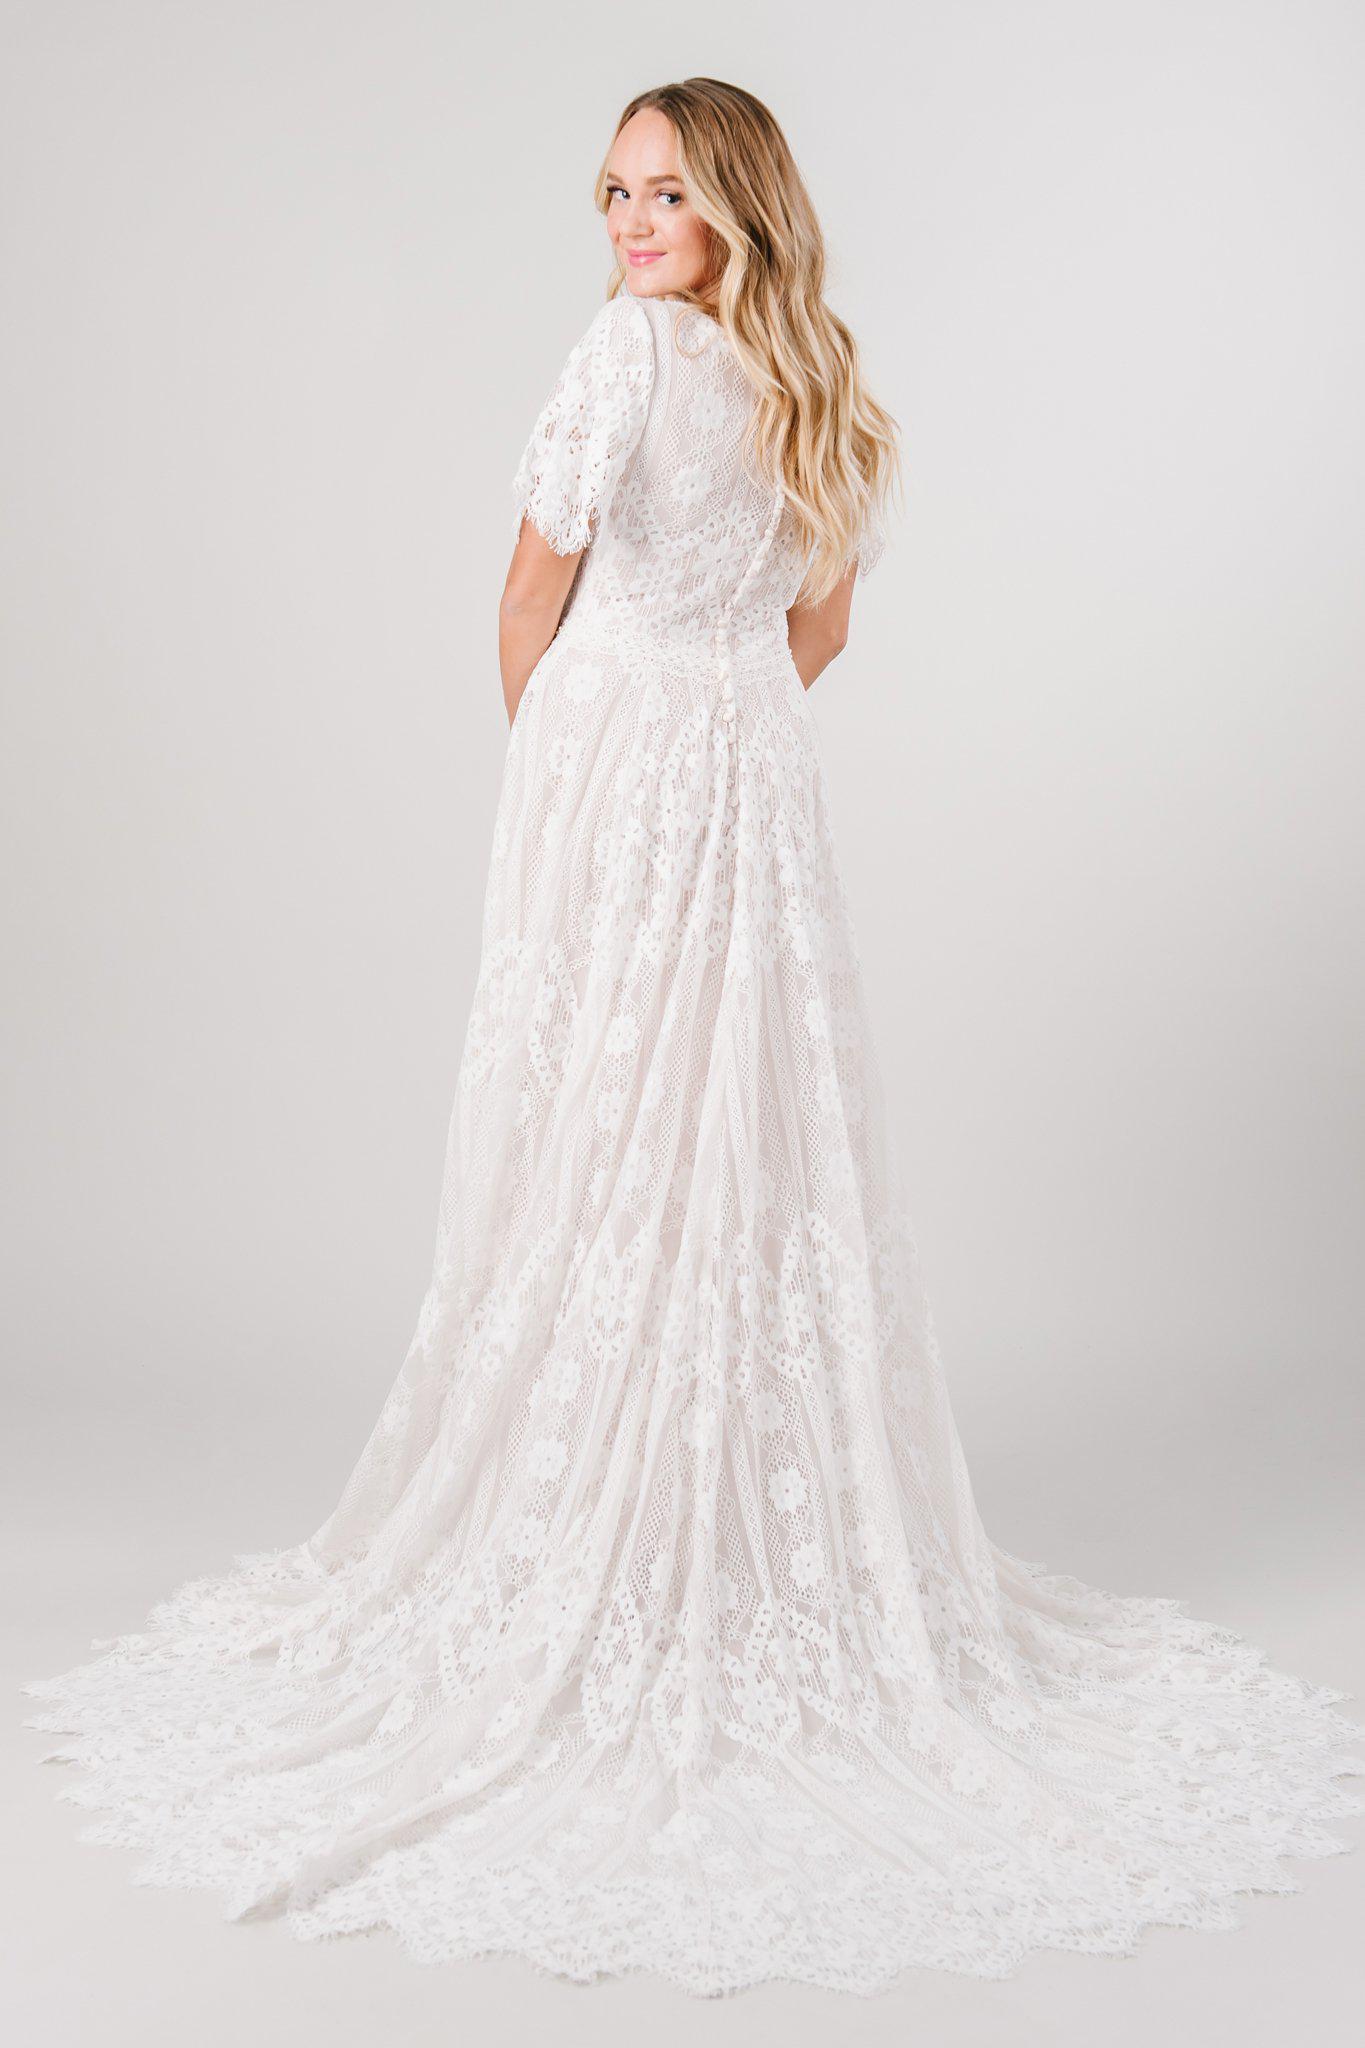 Back view boho lace modest wedding dress with flutter sleeves. This modest wedding dress is from LatterDayBride, a bridal shop located in downtown Salt Lake City, Utah.